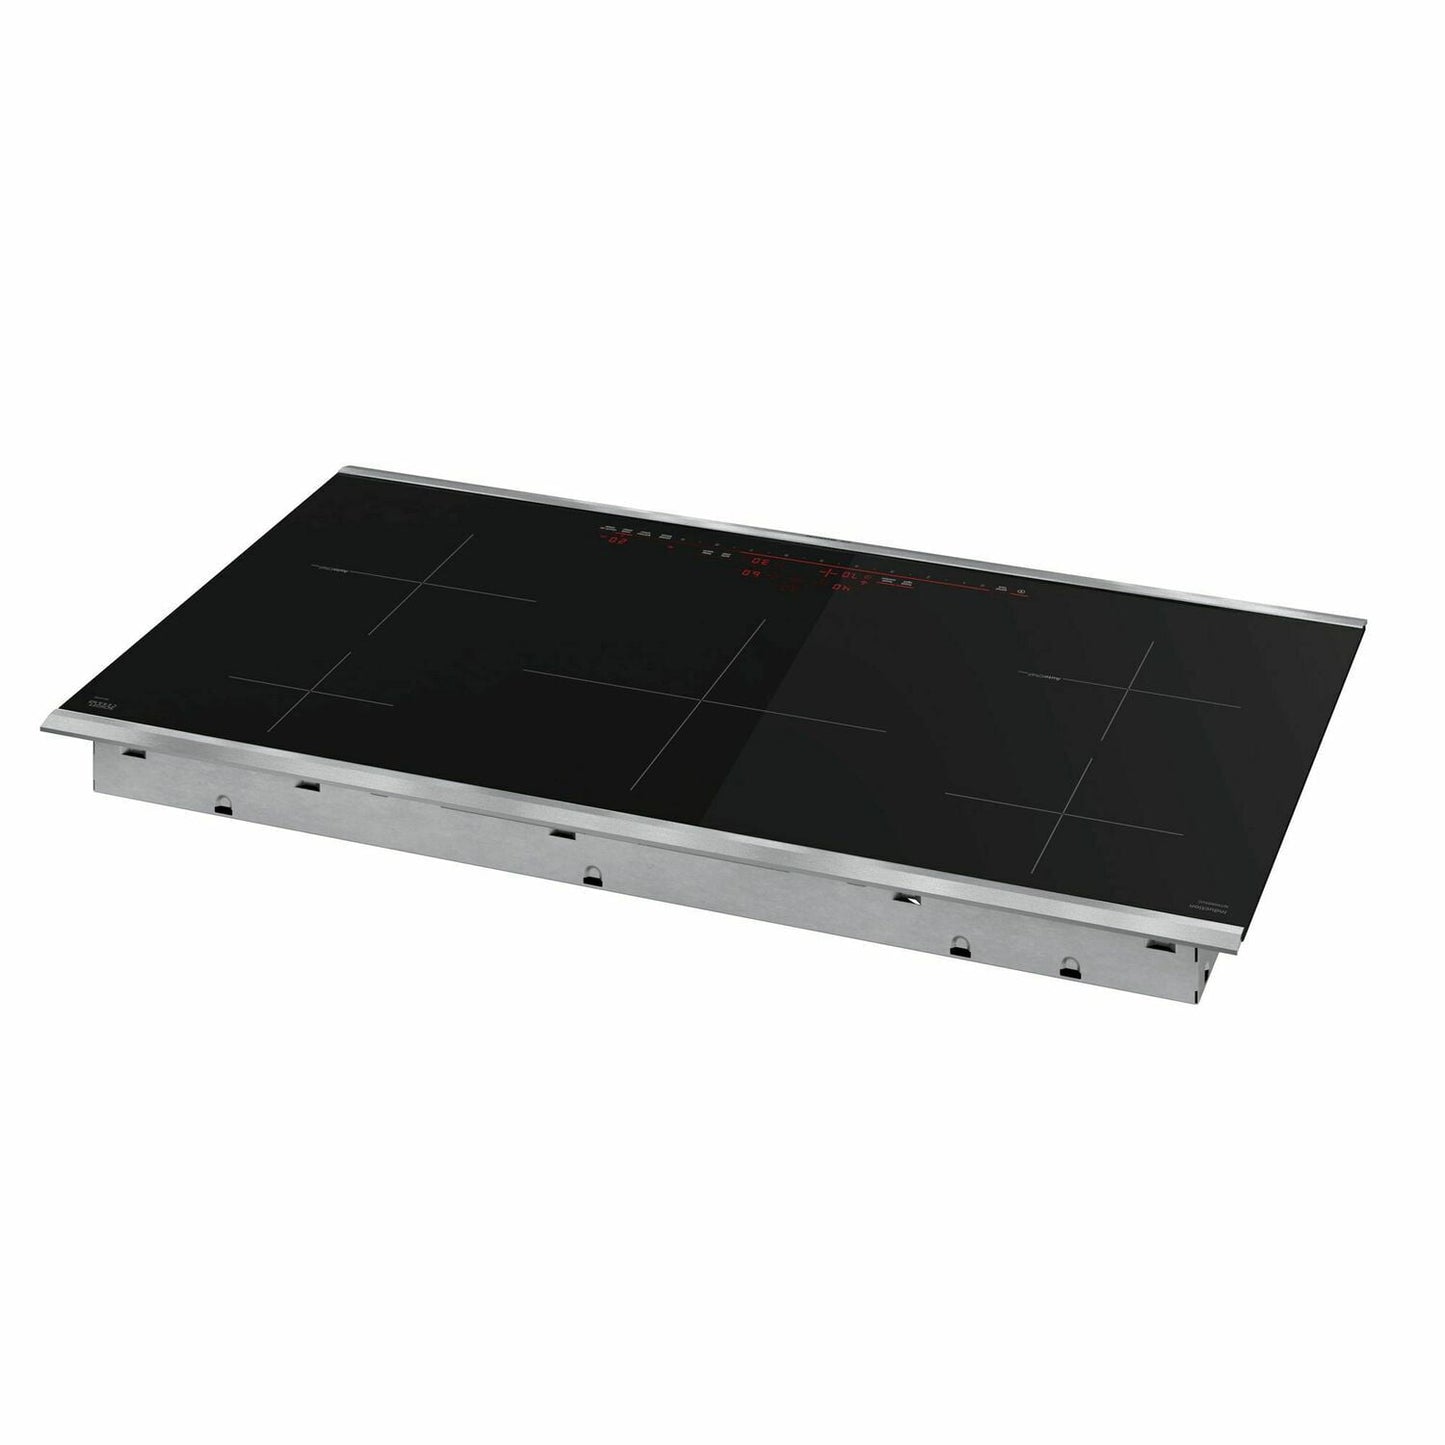 Bosch NIT8669SUC 800 Series Induction Cooktop 36'' Black Nit8669Suc